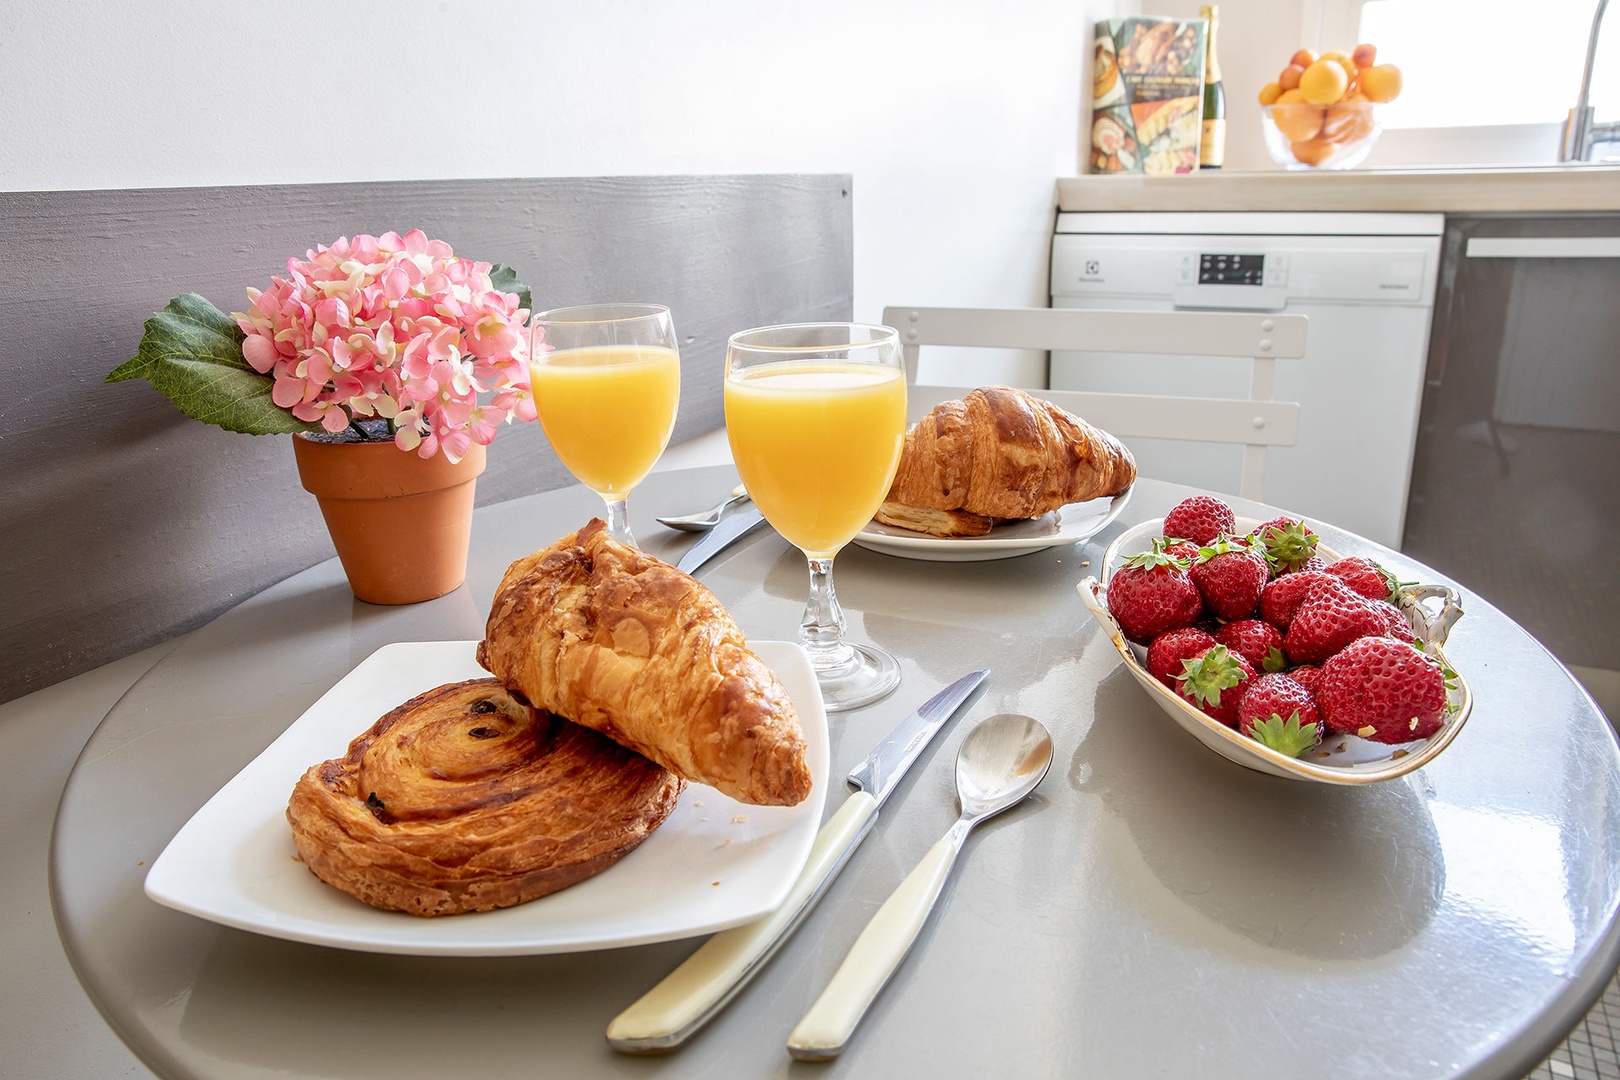 Start your day with relaxed breakfasts at home.